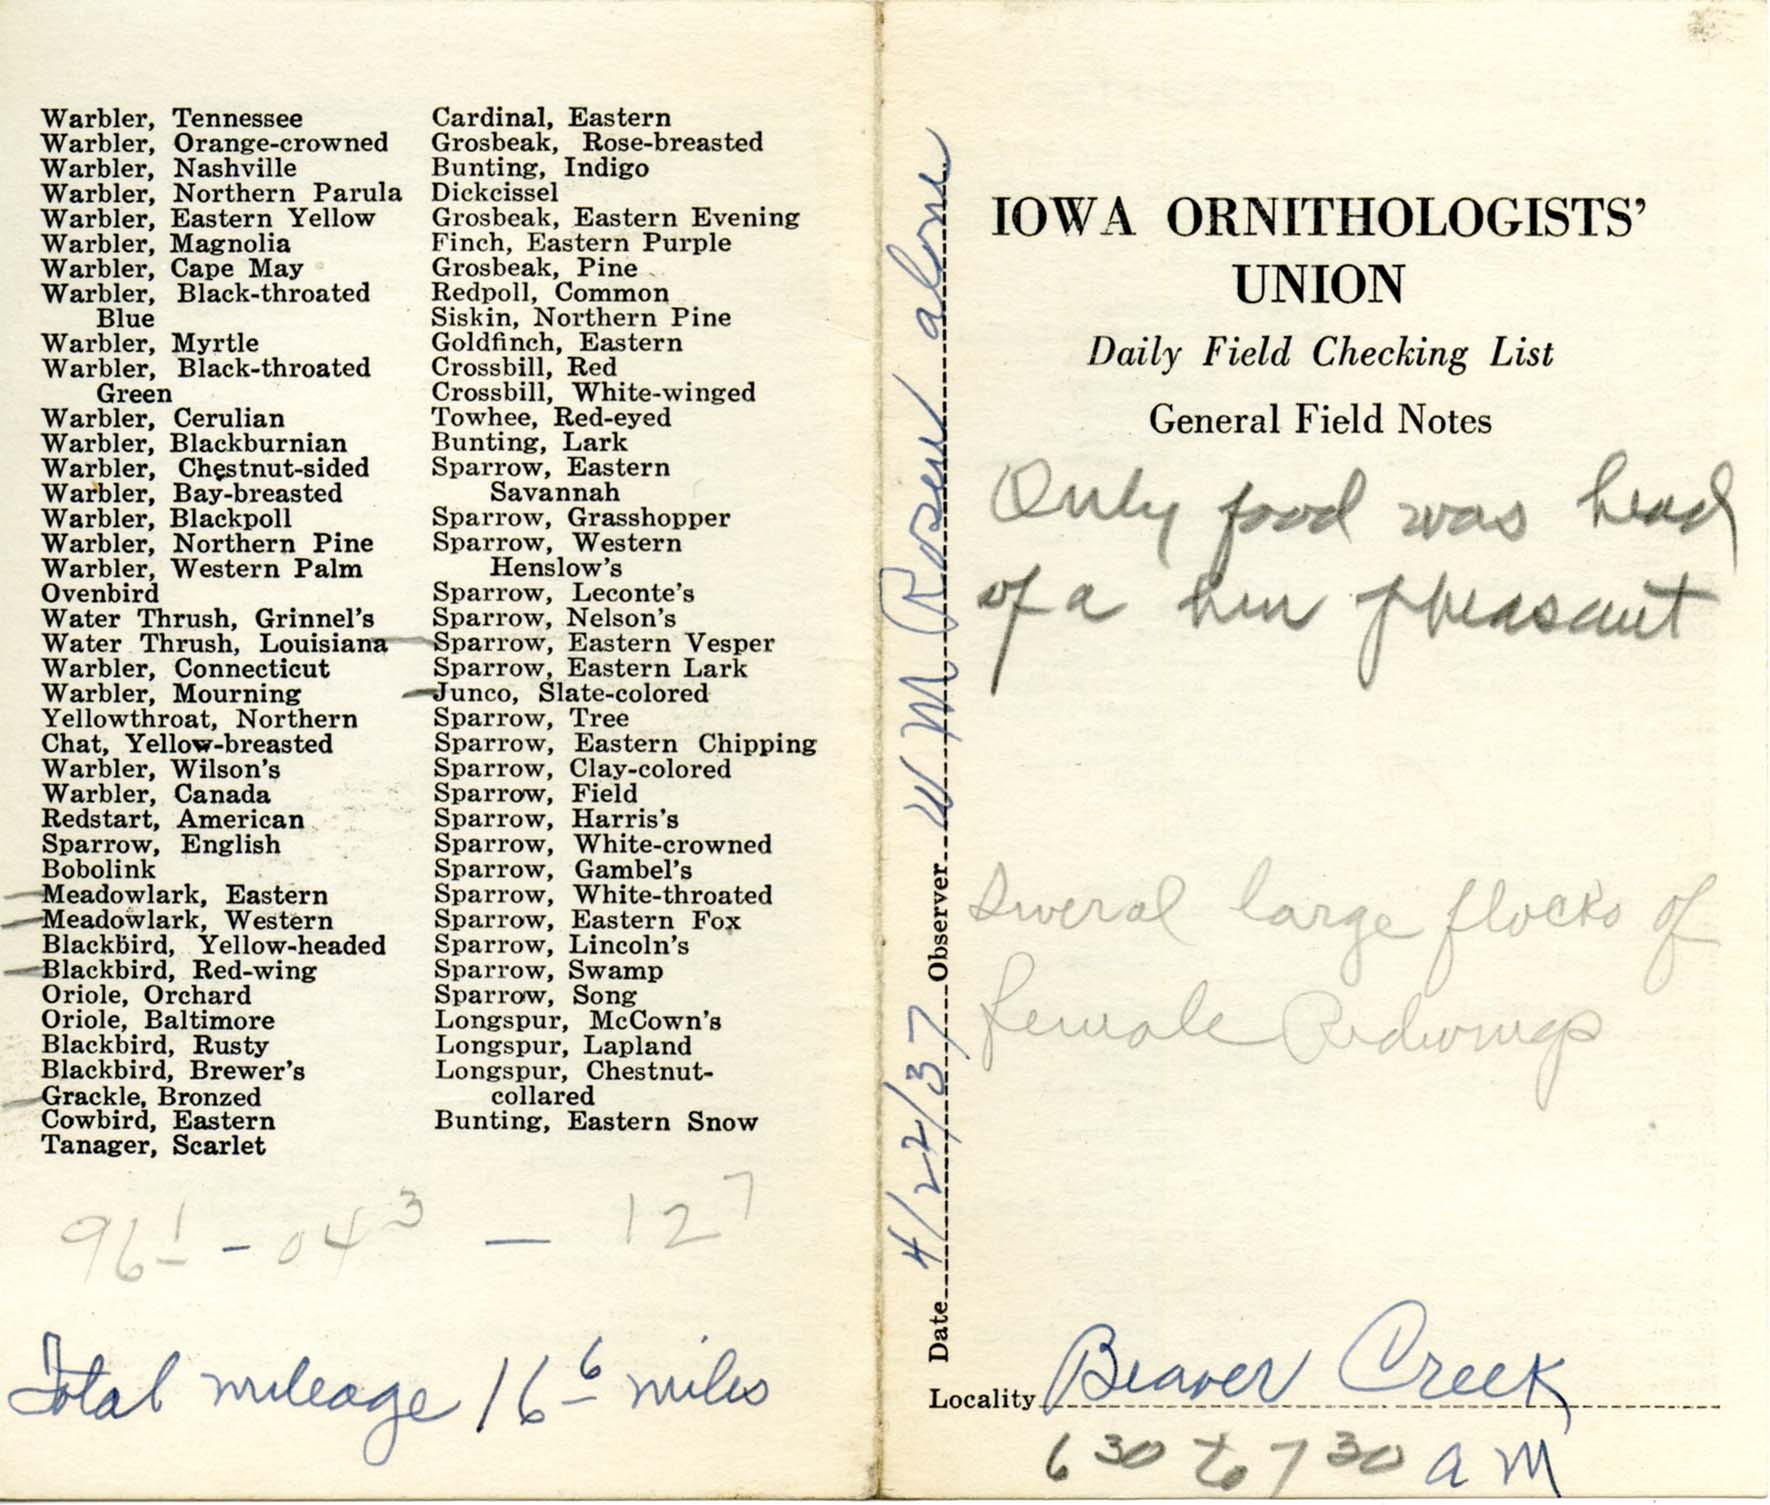 Daily field checking list by Walter Rosene, April 22, 1937